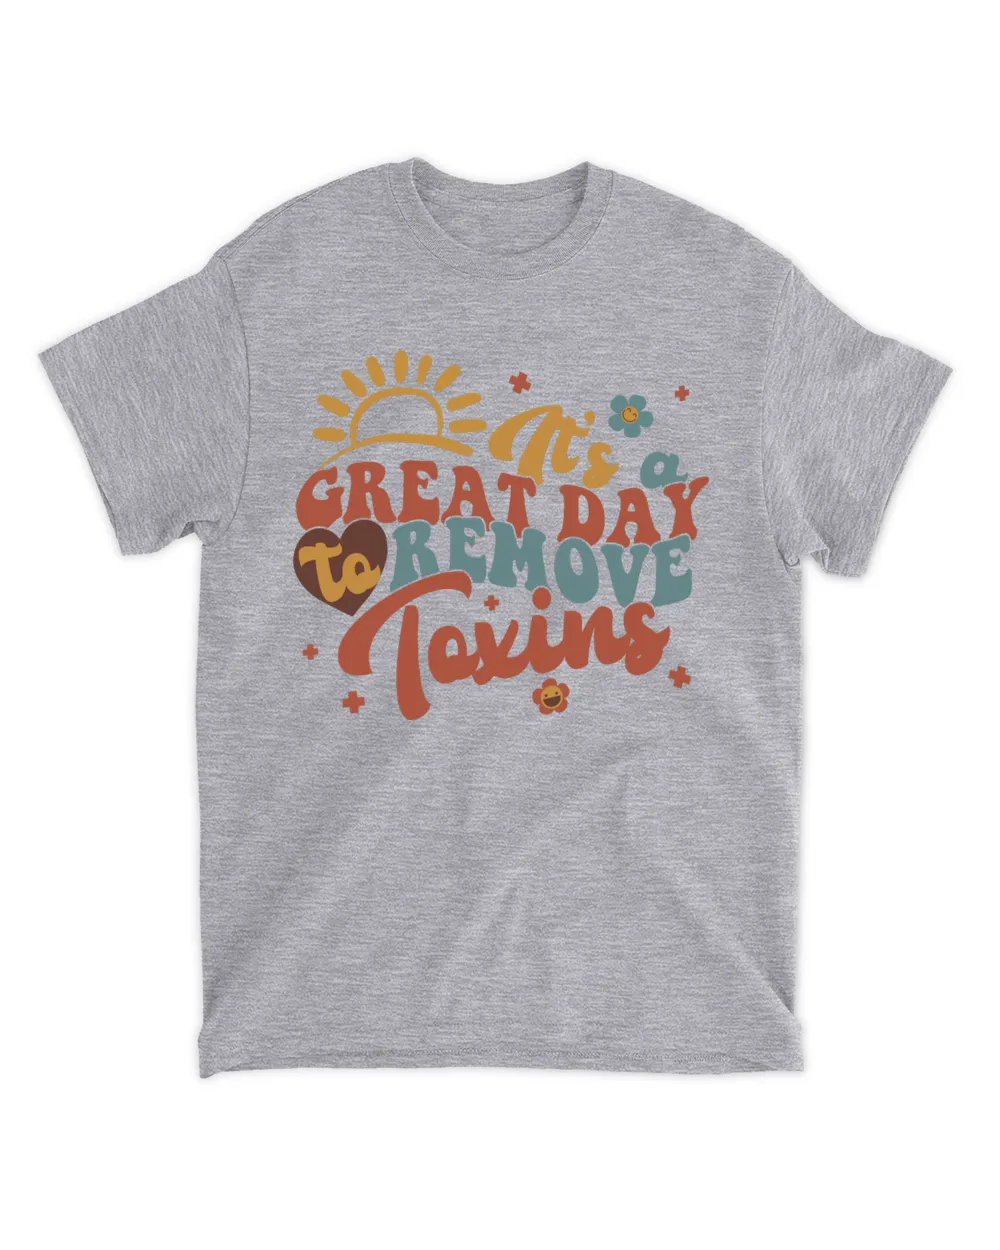 It's A Great Day To Remove Toxins Shirt, Dialysis Nurse Shirt, Dialysis Tech Shirt, Nurse Graduate Gift, New Nurse Gift